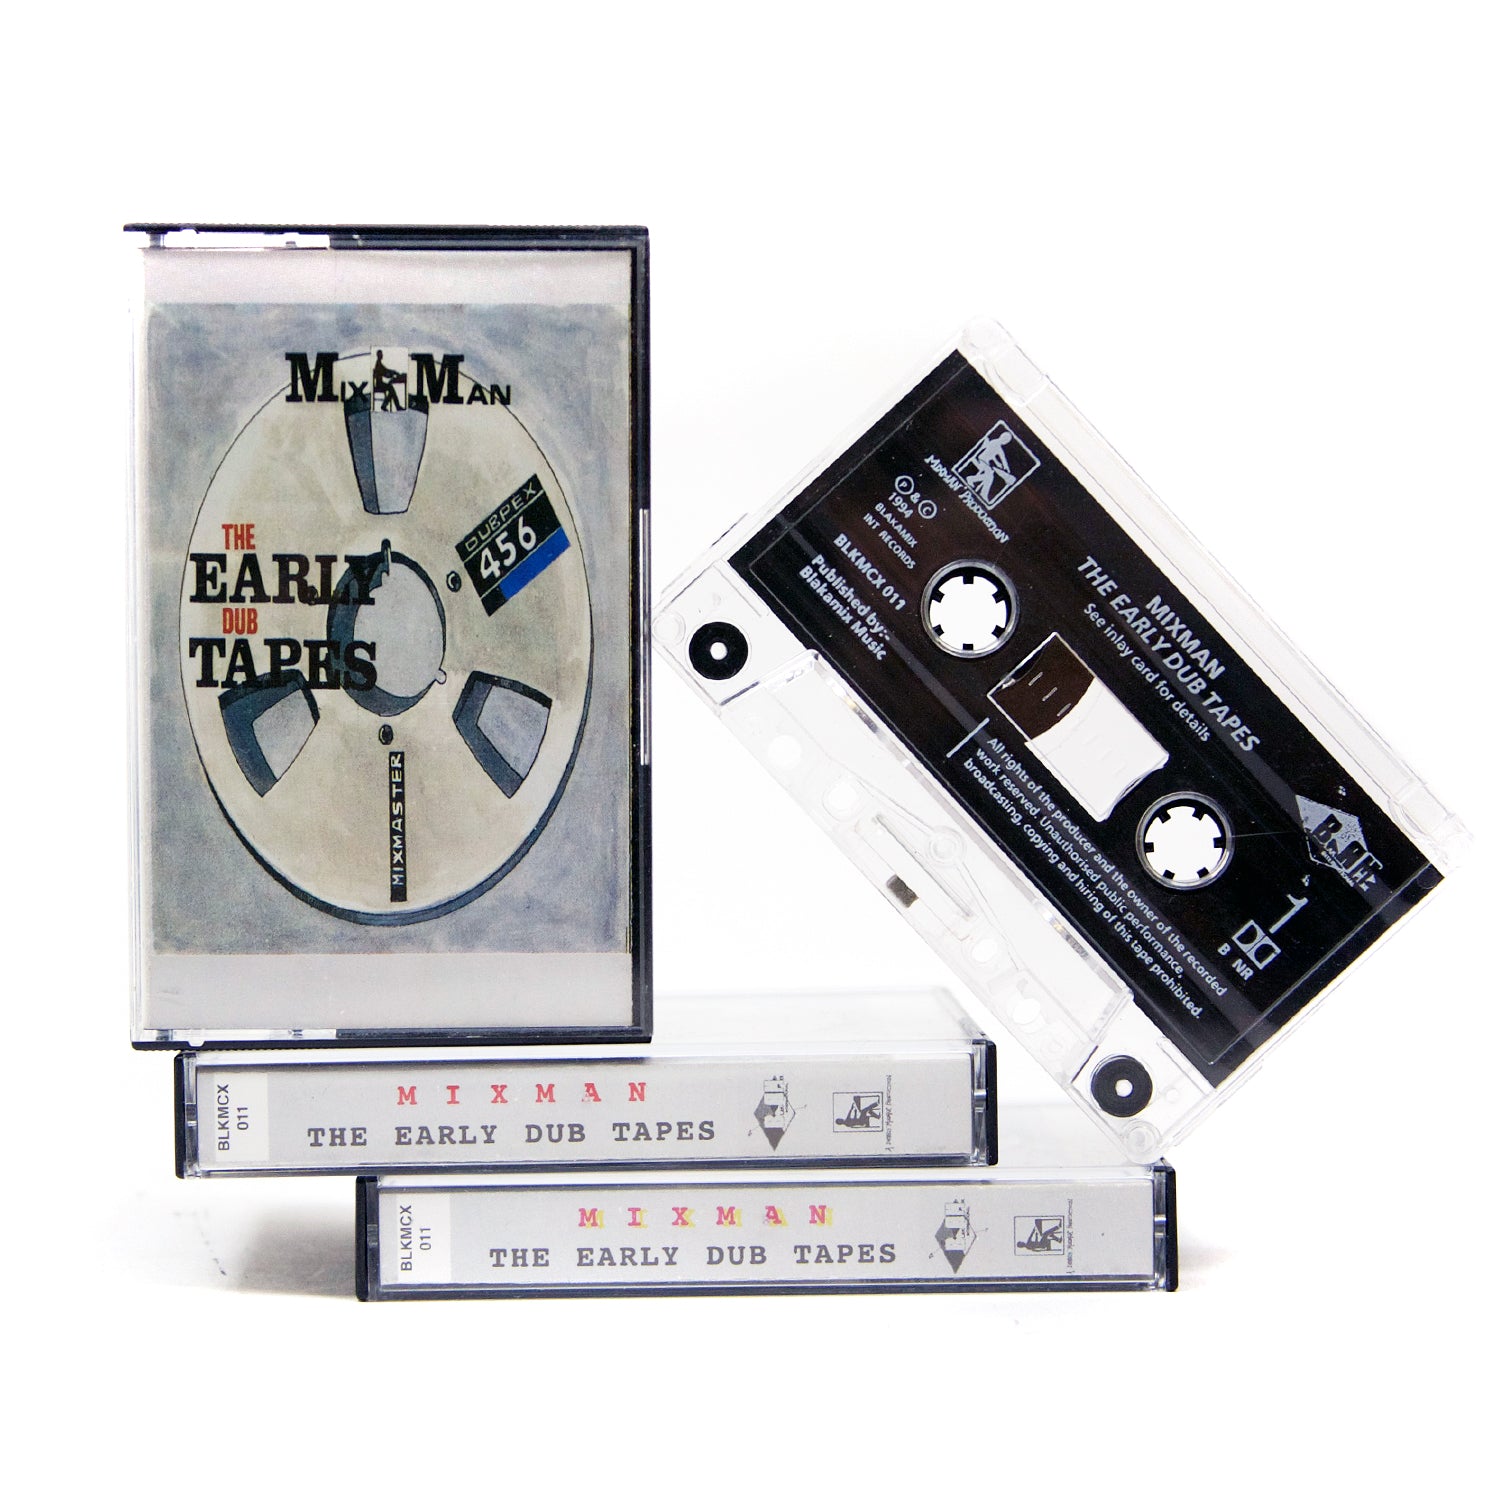 Early-dub-tapes